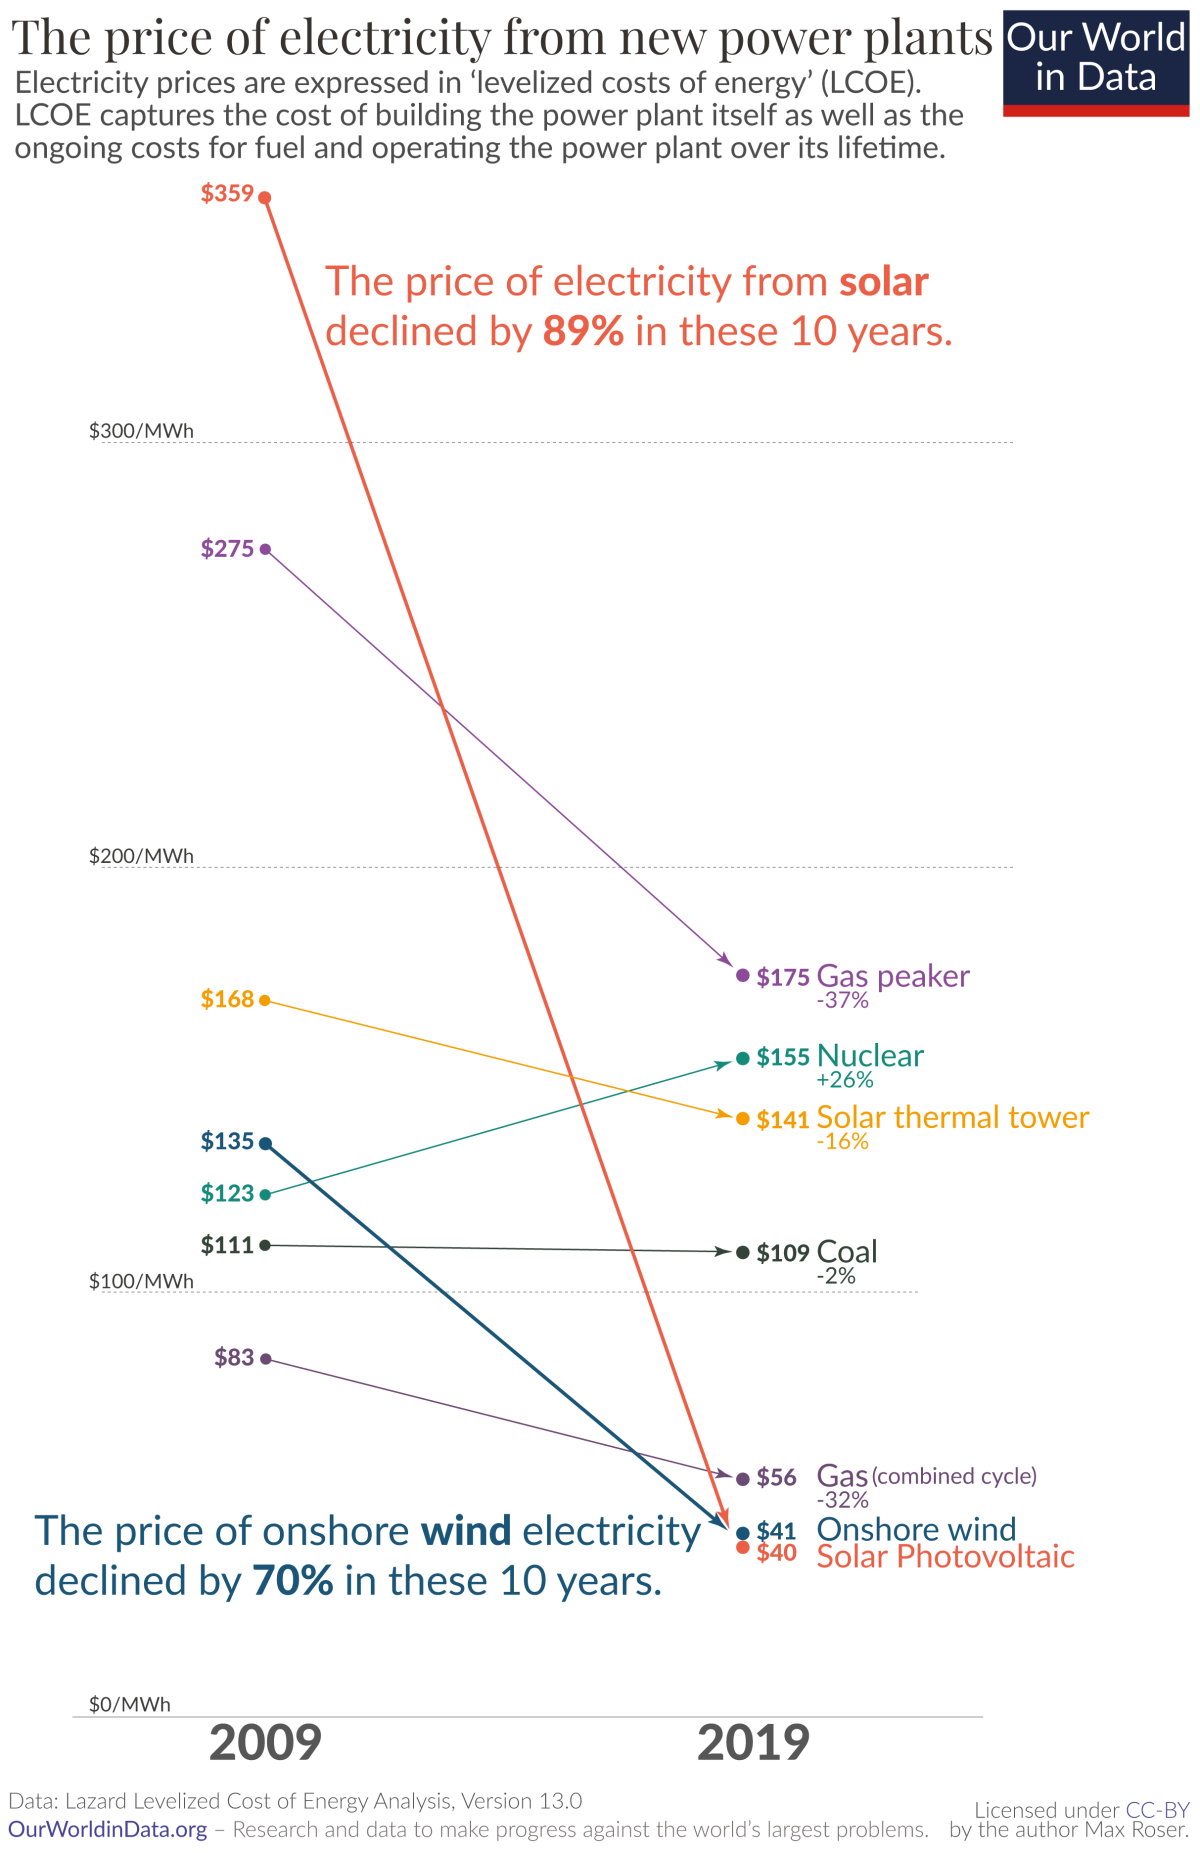 Graph shows the price of electricity for new power plants. Source: Our World in Data. 